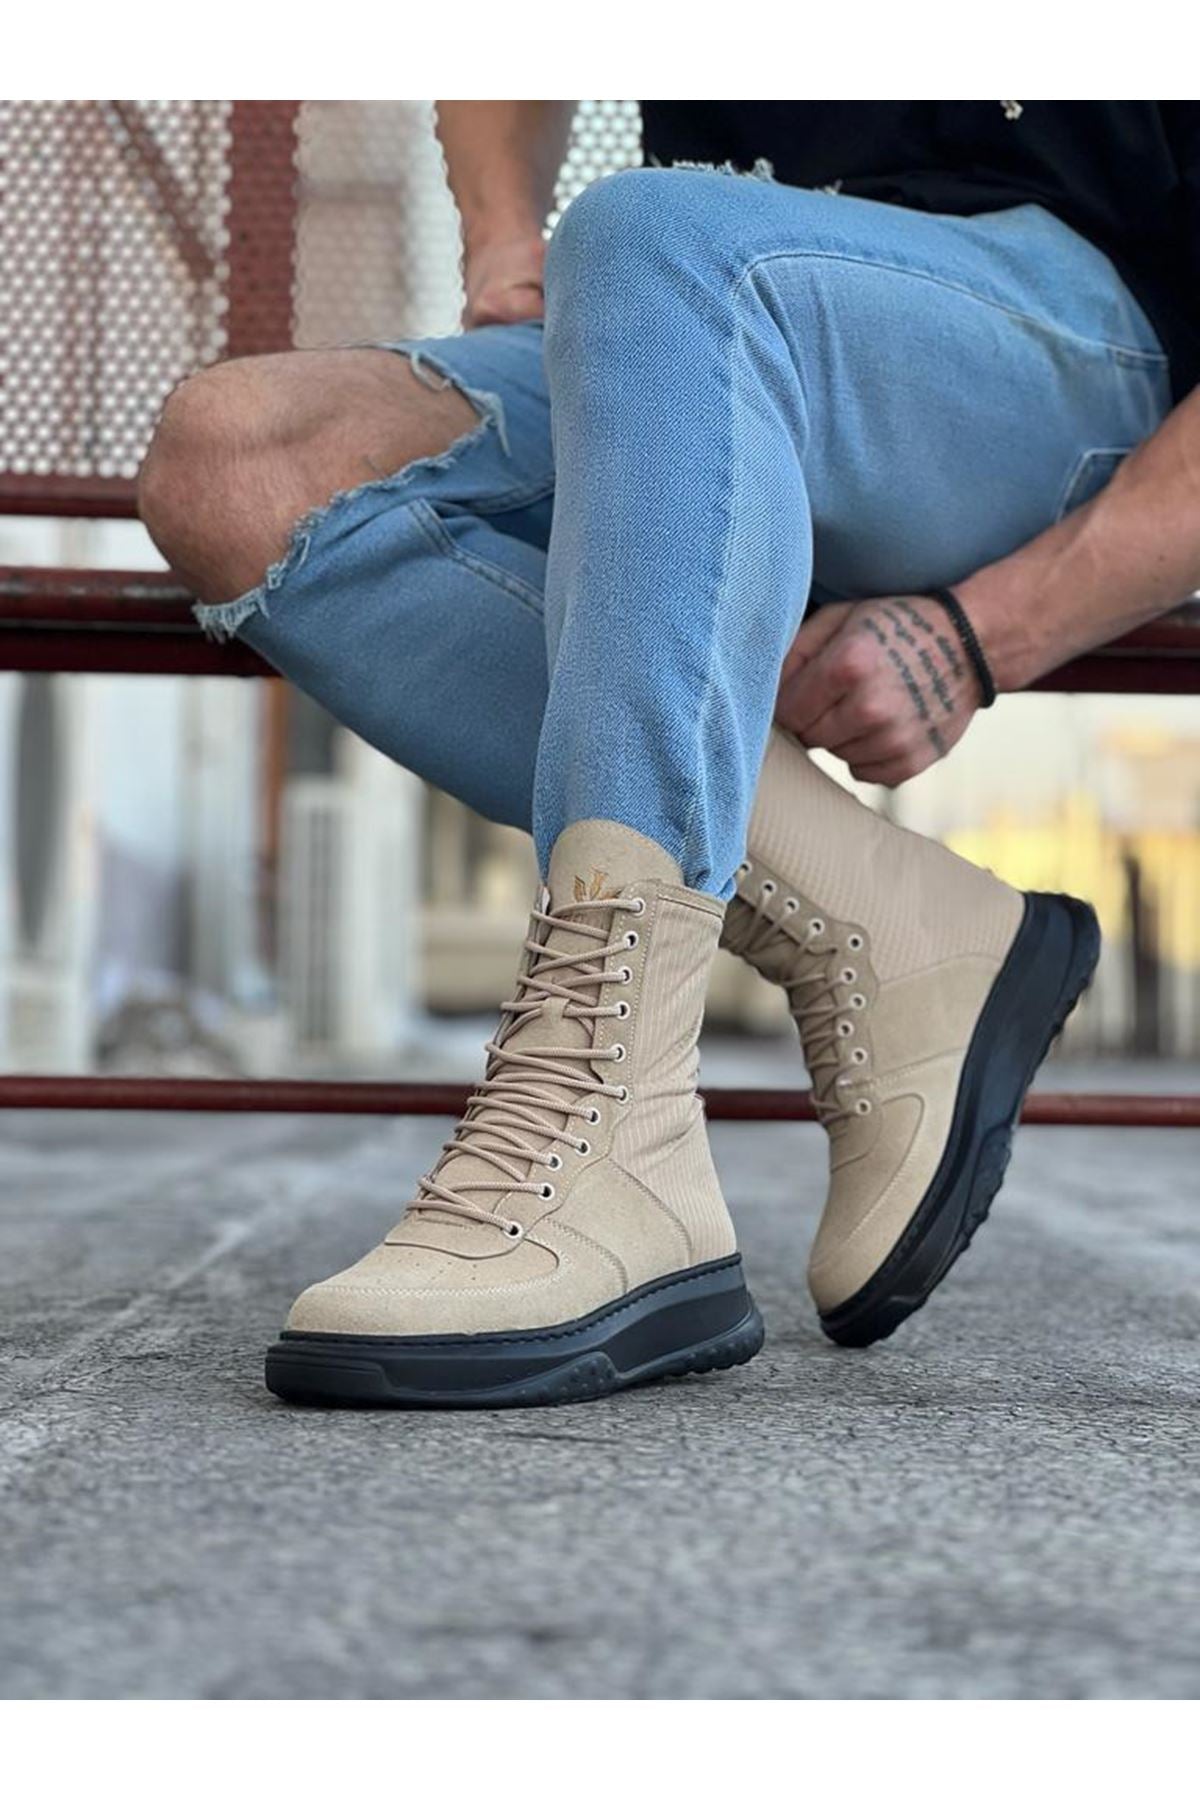 WG012 Men's Beige Charcoal Suede Leather Long Lace-Up Boots - STREETMODE ™